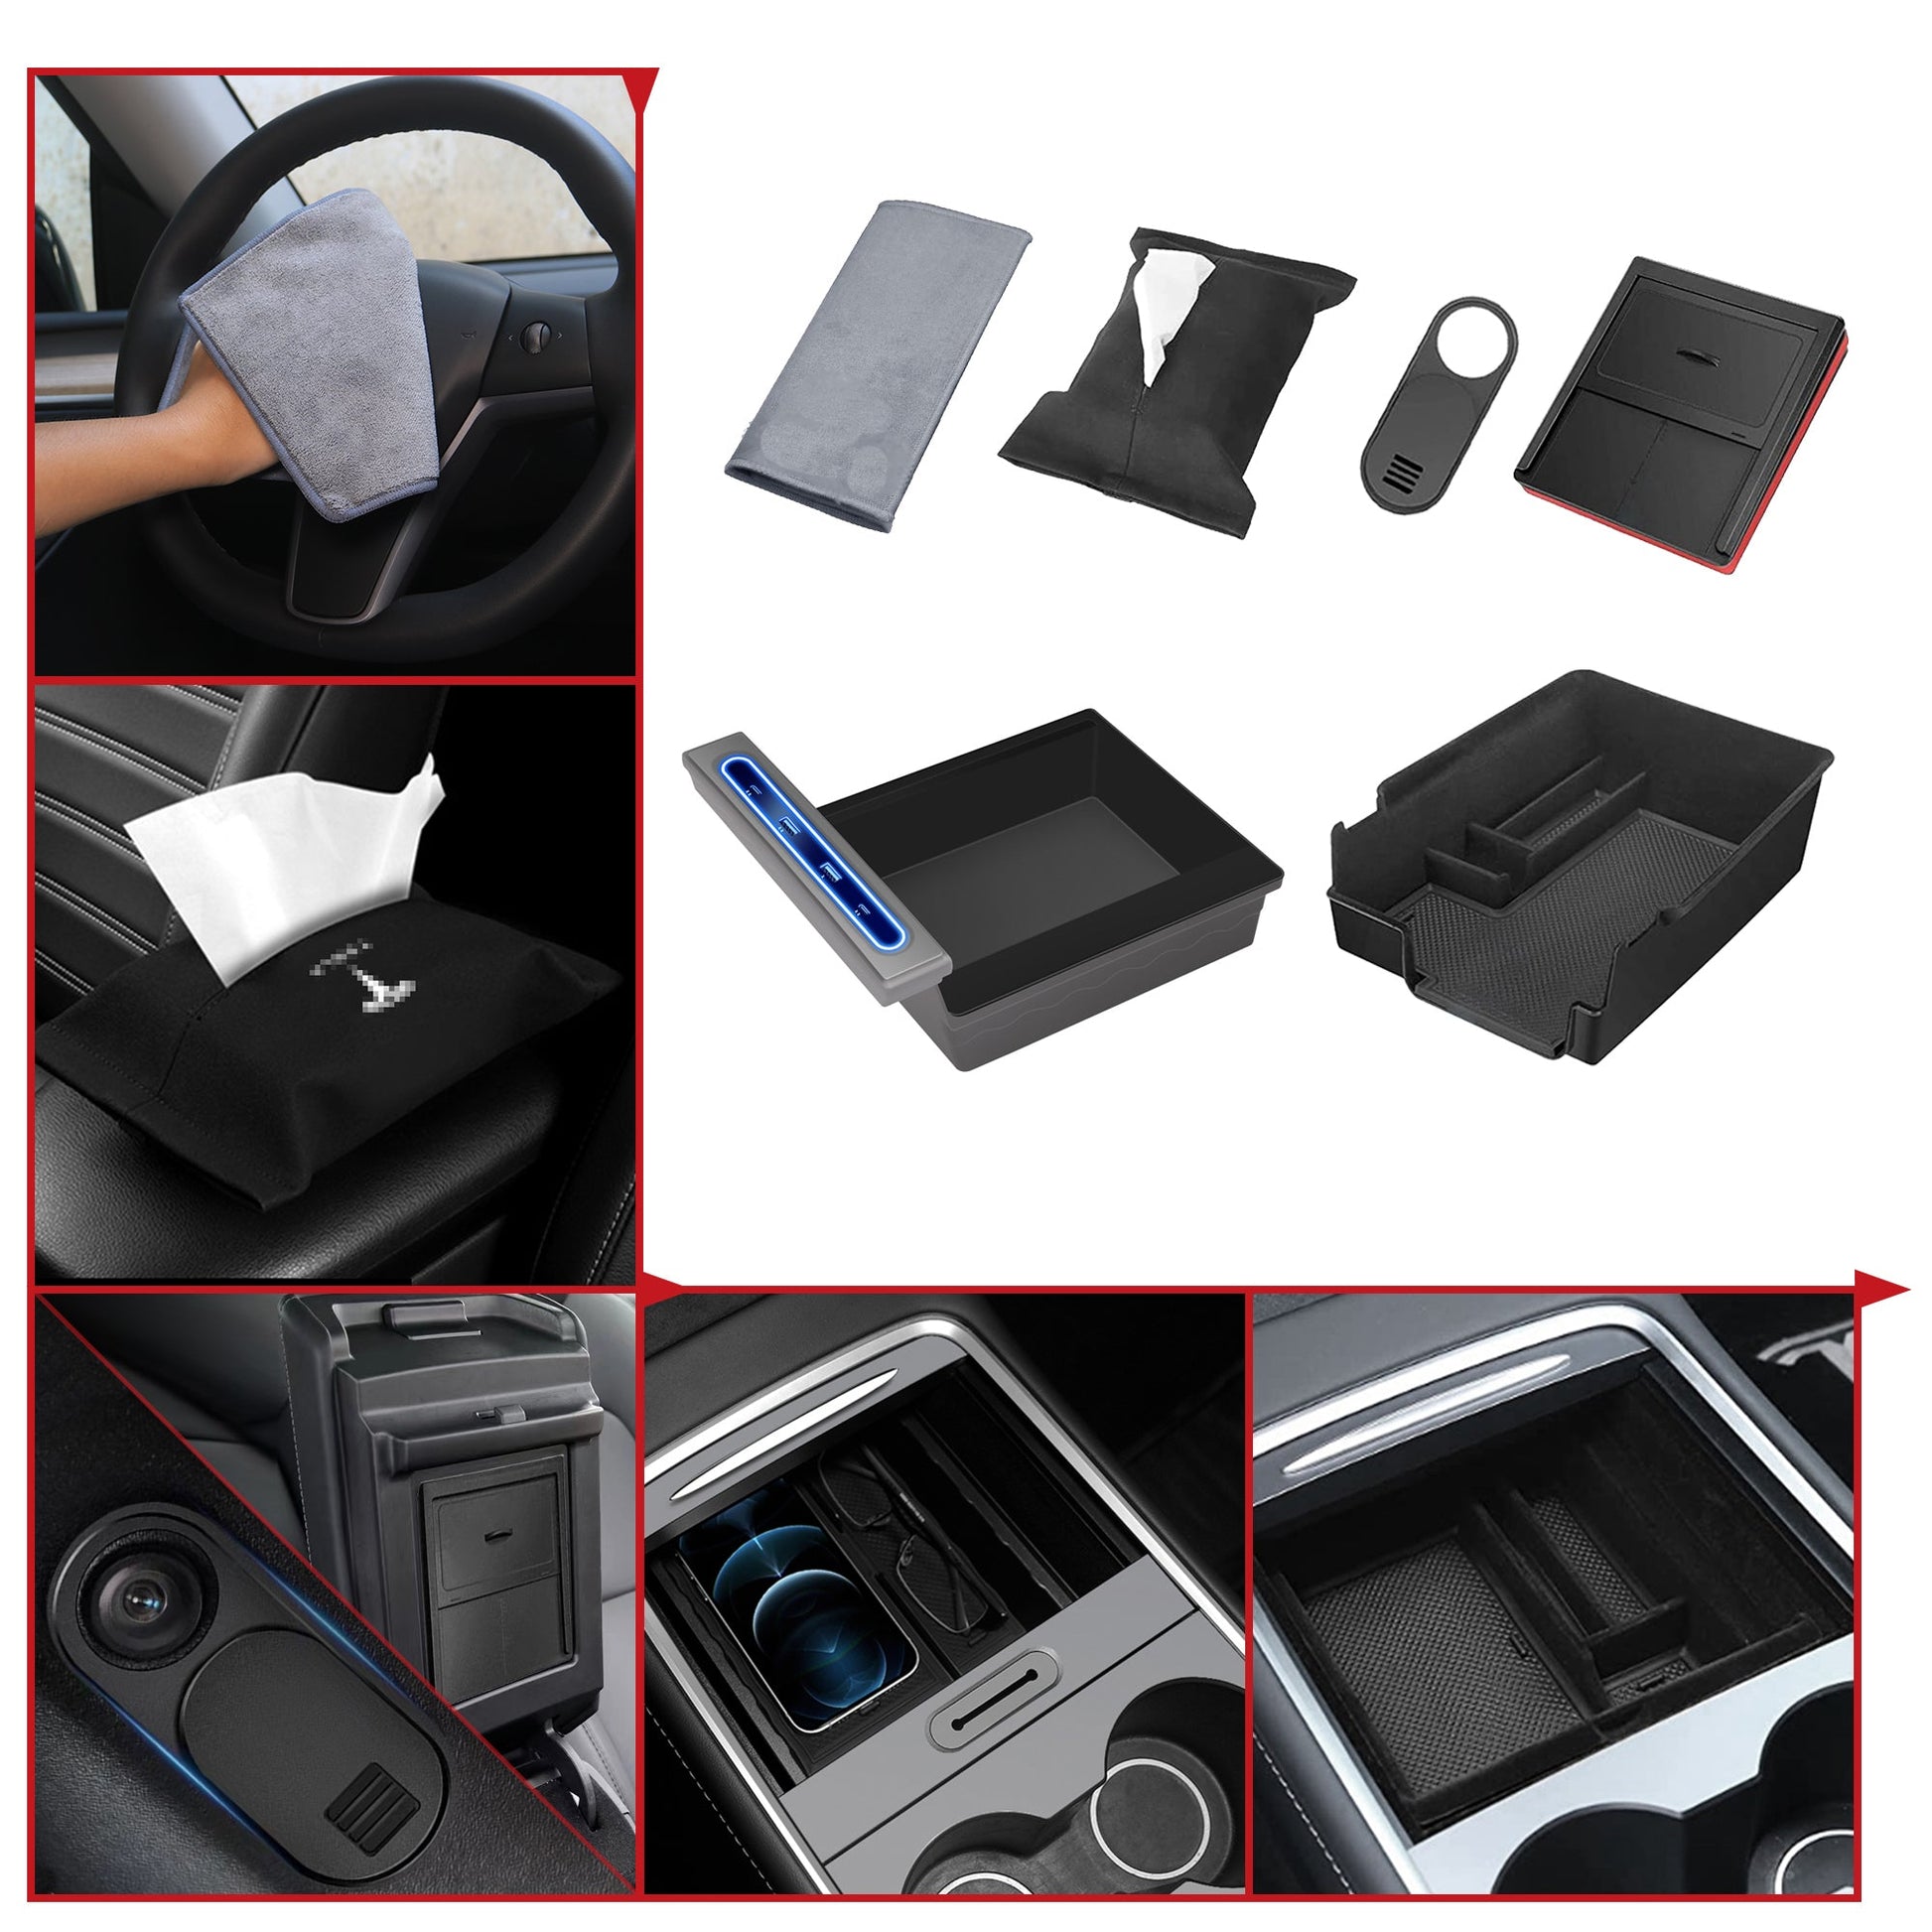 model 3 Y car 2022 2023 2021 2020 2019 2018 s3xy  USB HUB with Center Console Organizer Set topabyte accessories accessory aftermarket price Vehicles standard long range performance sr+ electric car rwd ev interior exterior diy decoration price elon musk must have black white red blue 5 7 seats seat